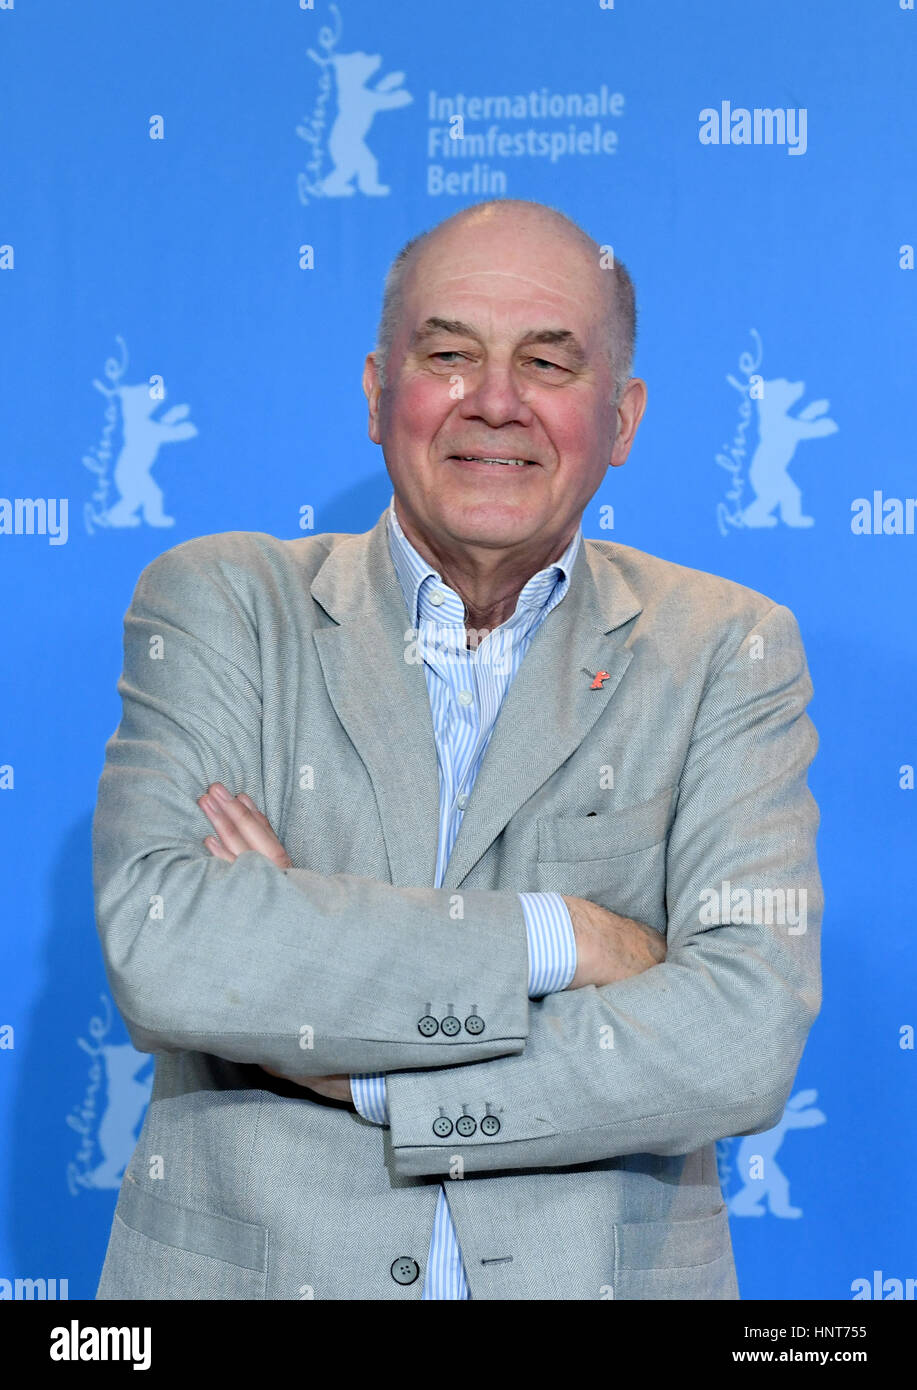 Berlin, Germany. 16th Feb, 2017. Actor Hanns Zischler, photographed during a photo call for the movie 'Masaryk' ('A Prominent Patient') at the 67th Berlinale Film Festival in Berlin, Germany, 16 February 2017. The film will be shown as part of the Berlinale Special Series. Photo: Jens Kalaene/dpa/Alamy Live News Stock Photo